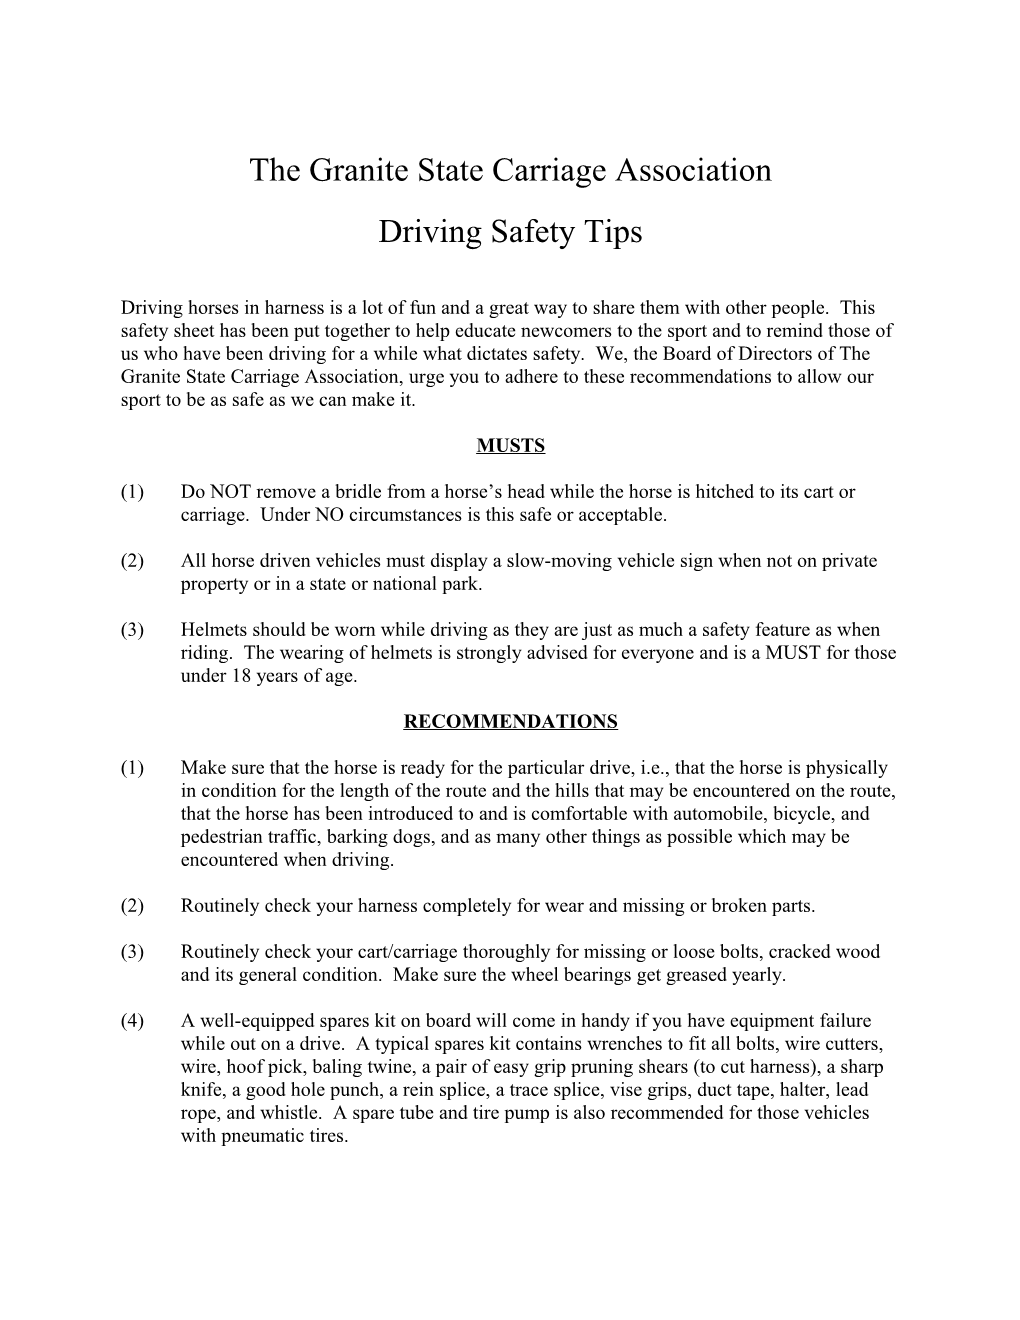 The Granite State Carriage Association